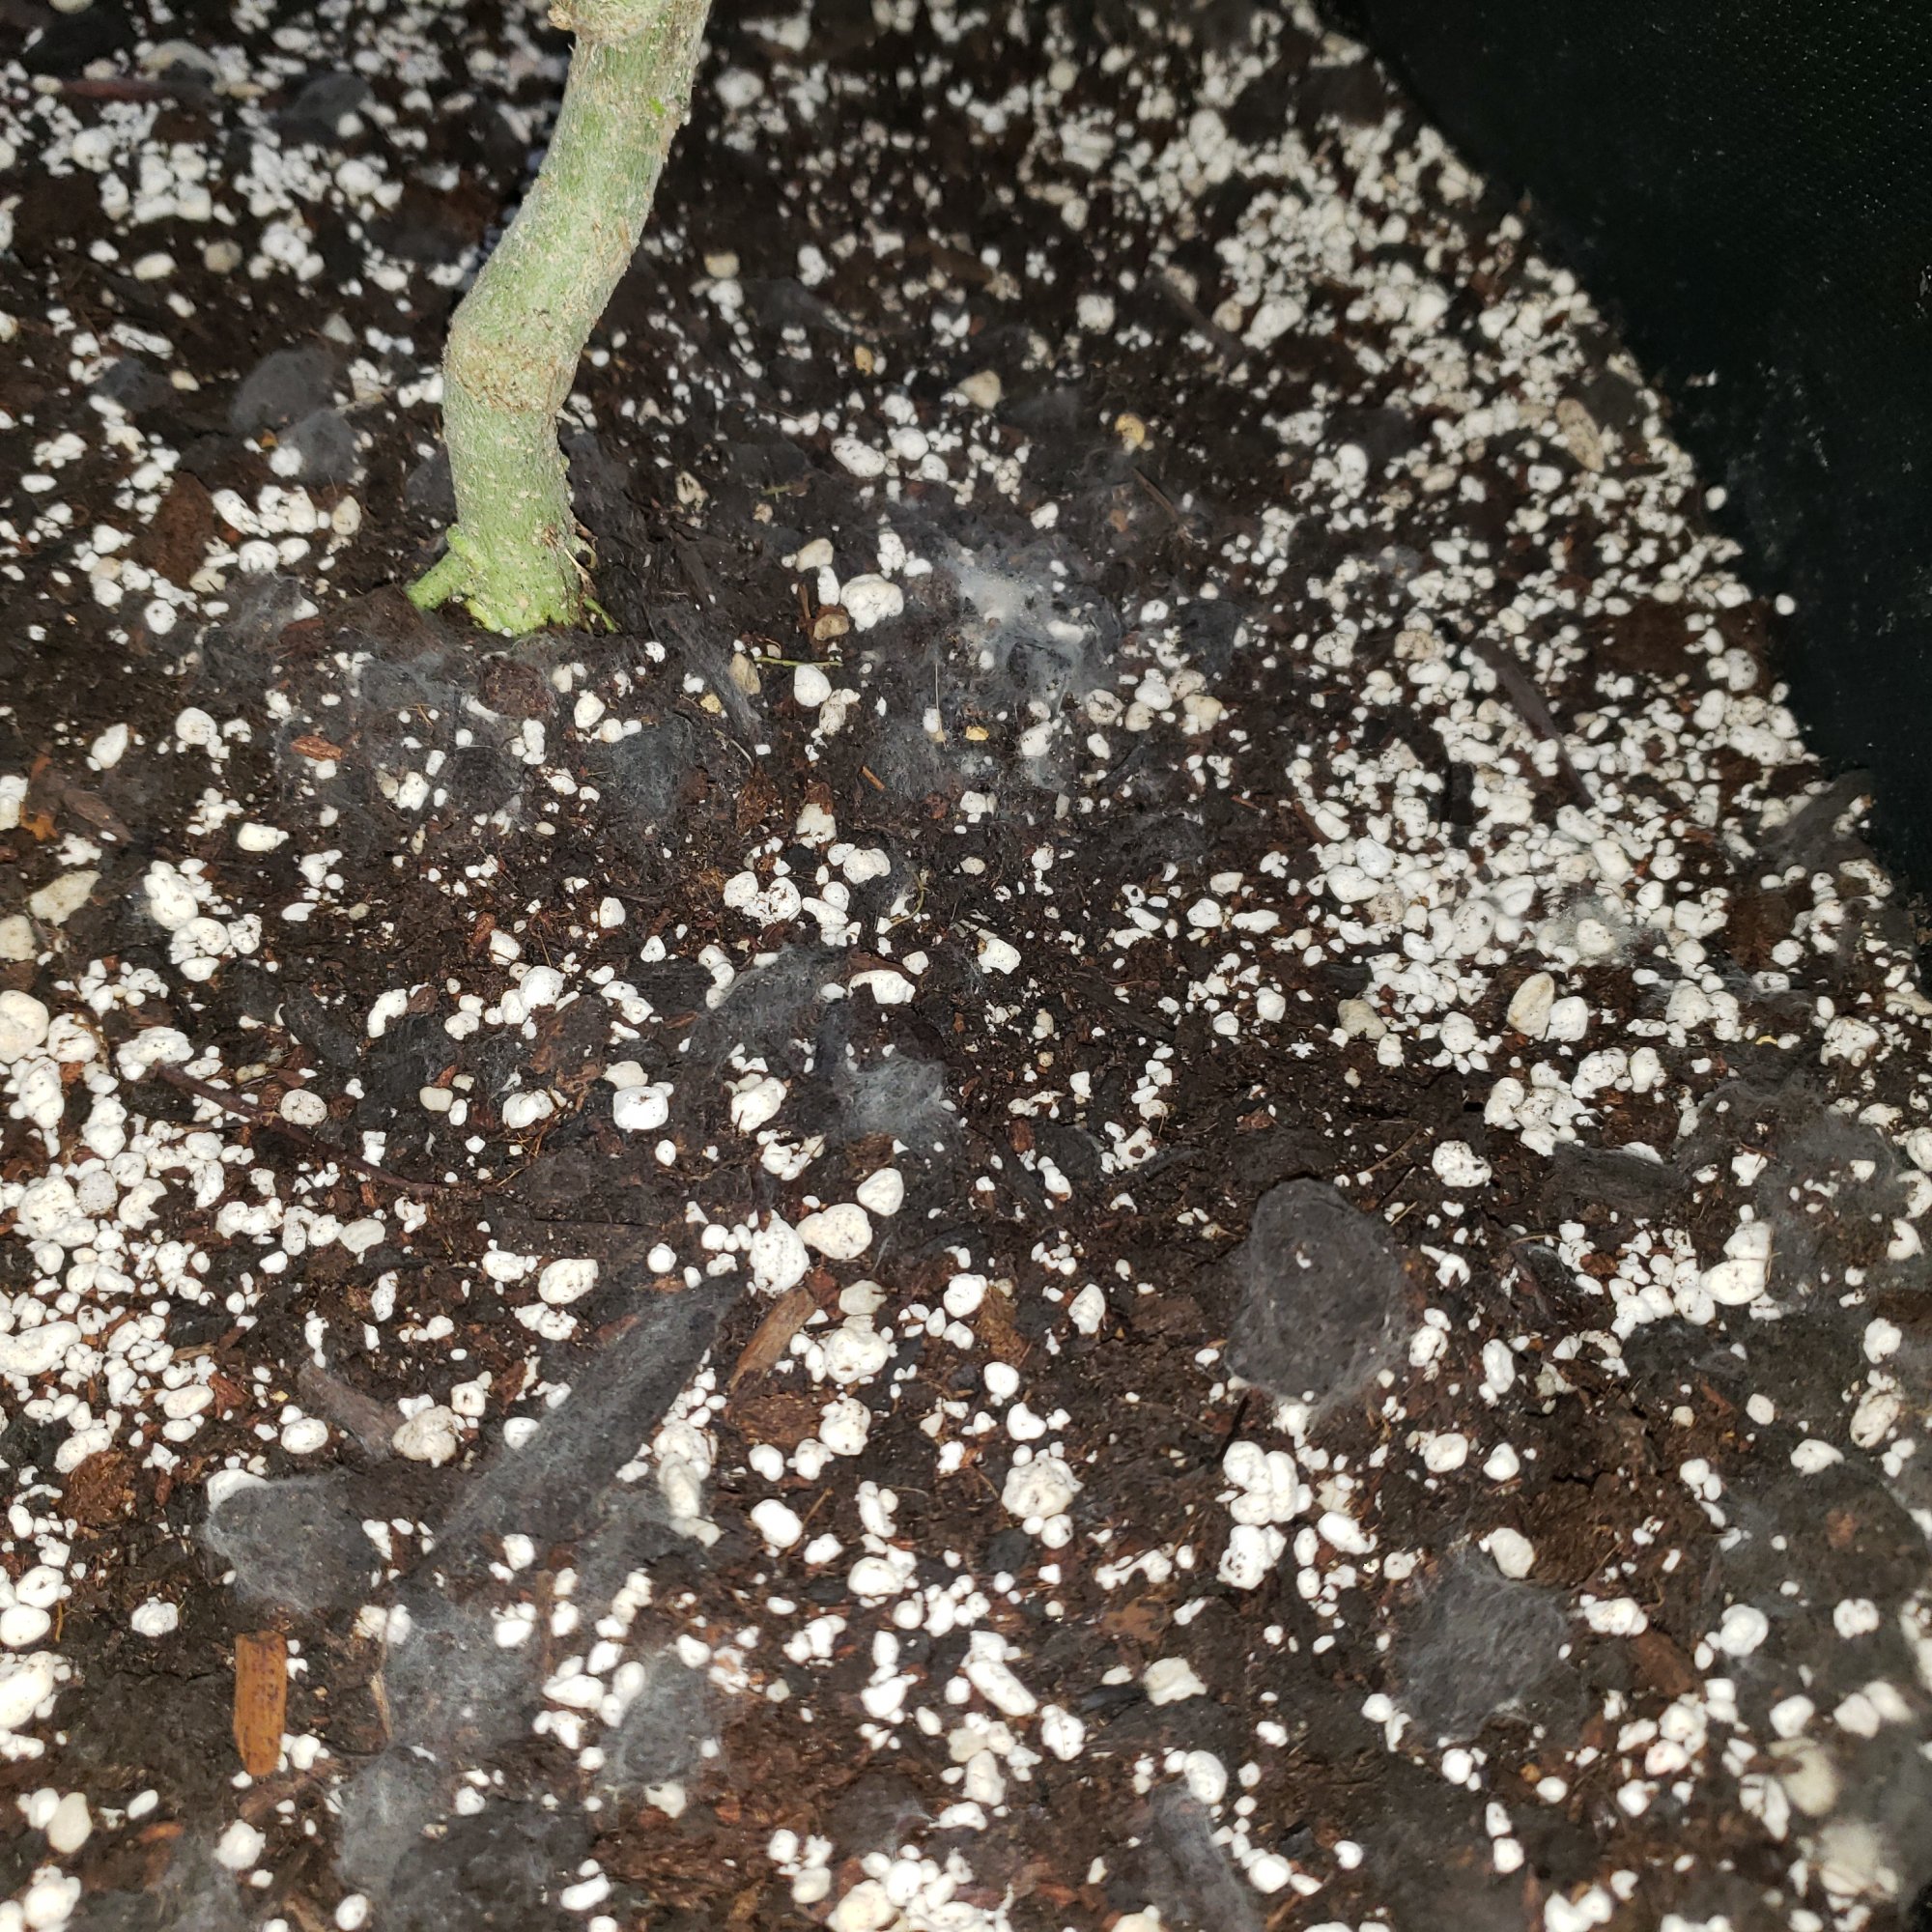 Having mildew or molding issue in the soil and now it is appearing on the leaves 3